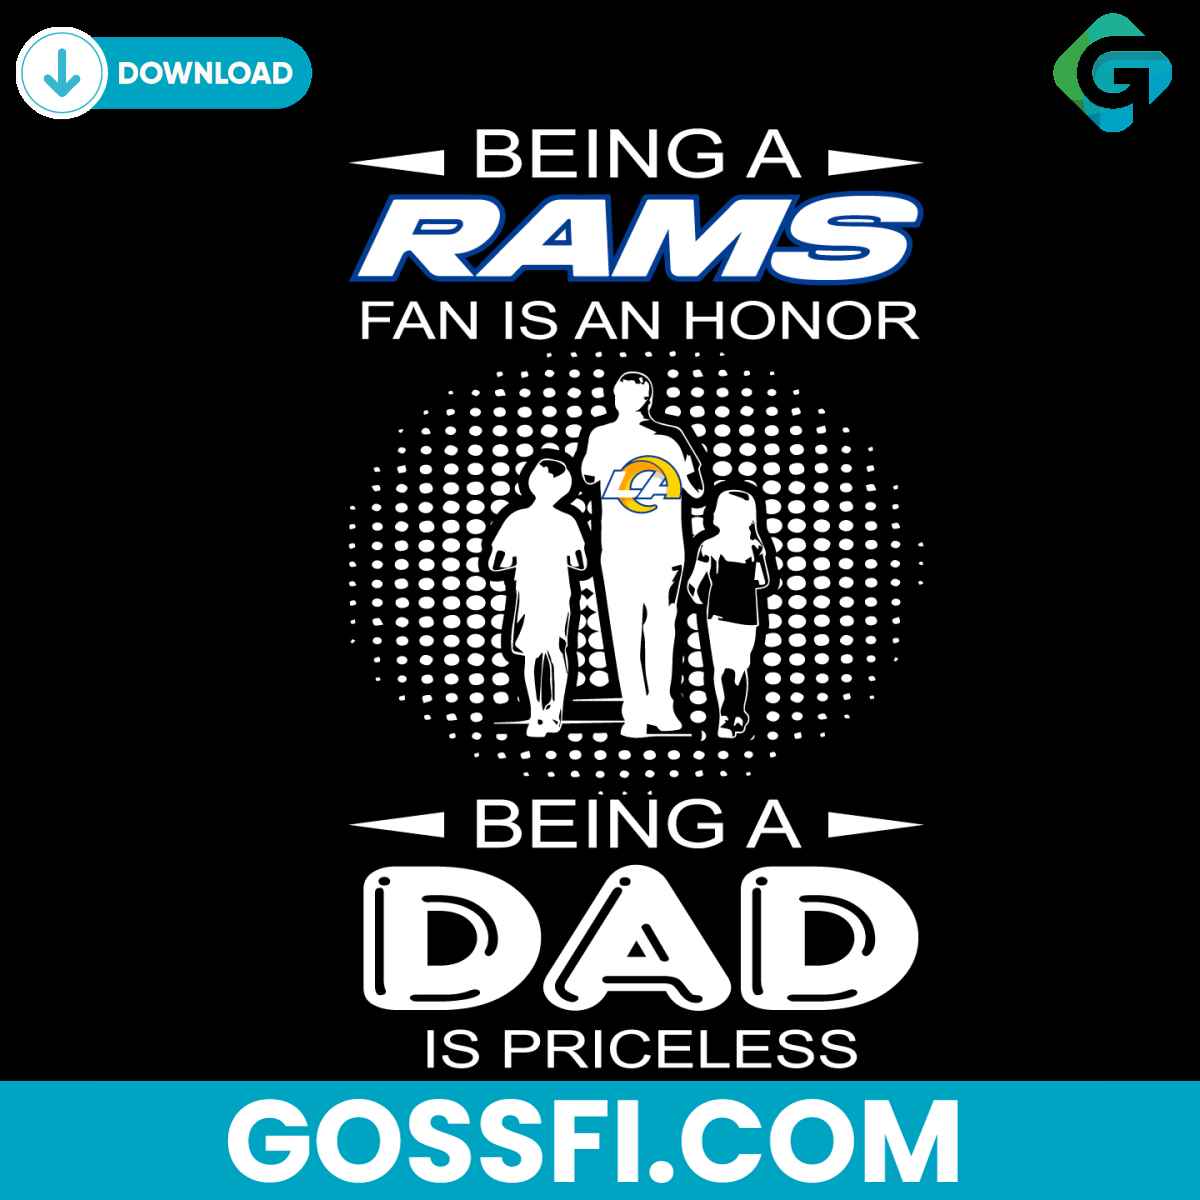 being-a-rams-fan-is-an-honor-being-a-dad-is-priceless-svg